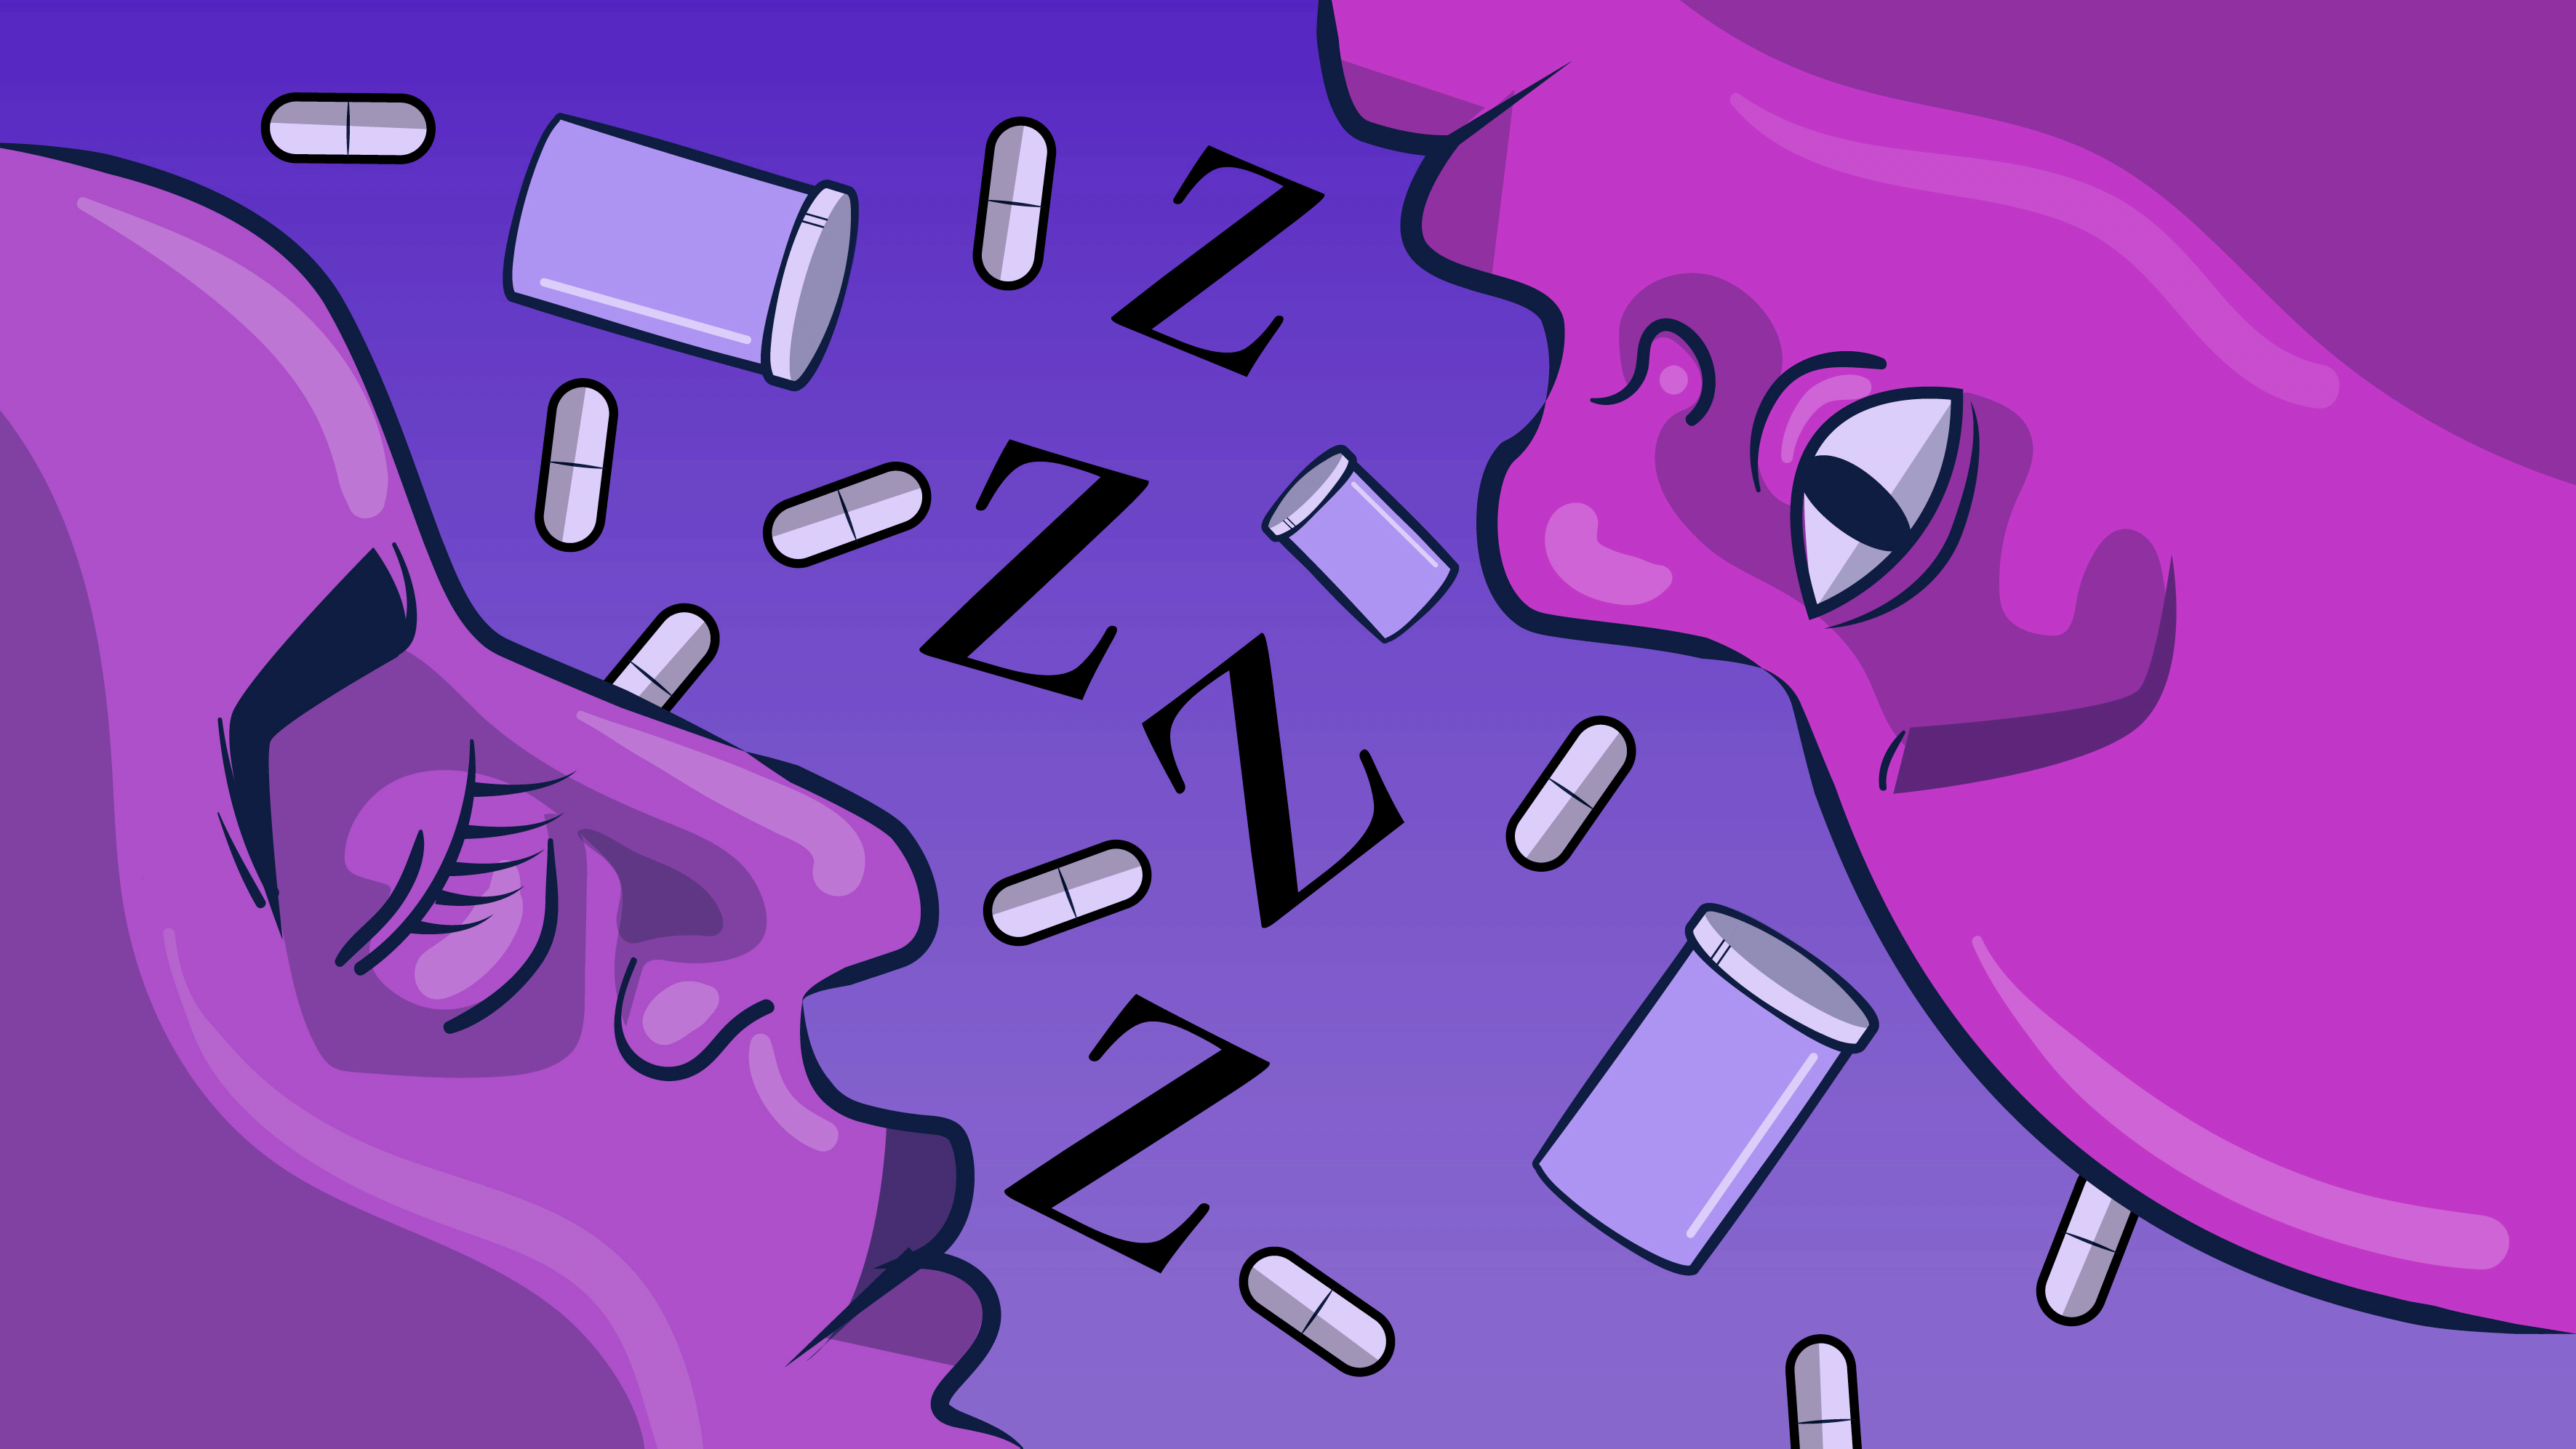 purple faces looking at eachother and Zs floating with pills and pill bottles